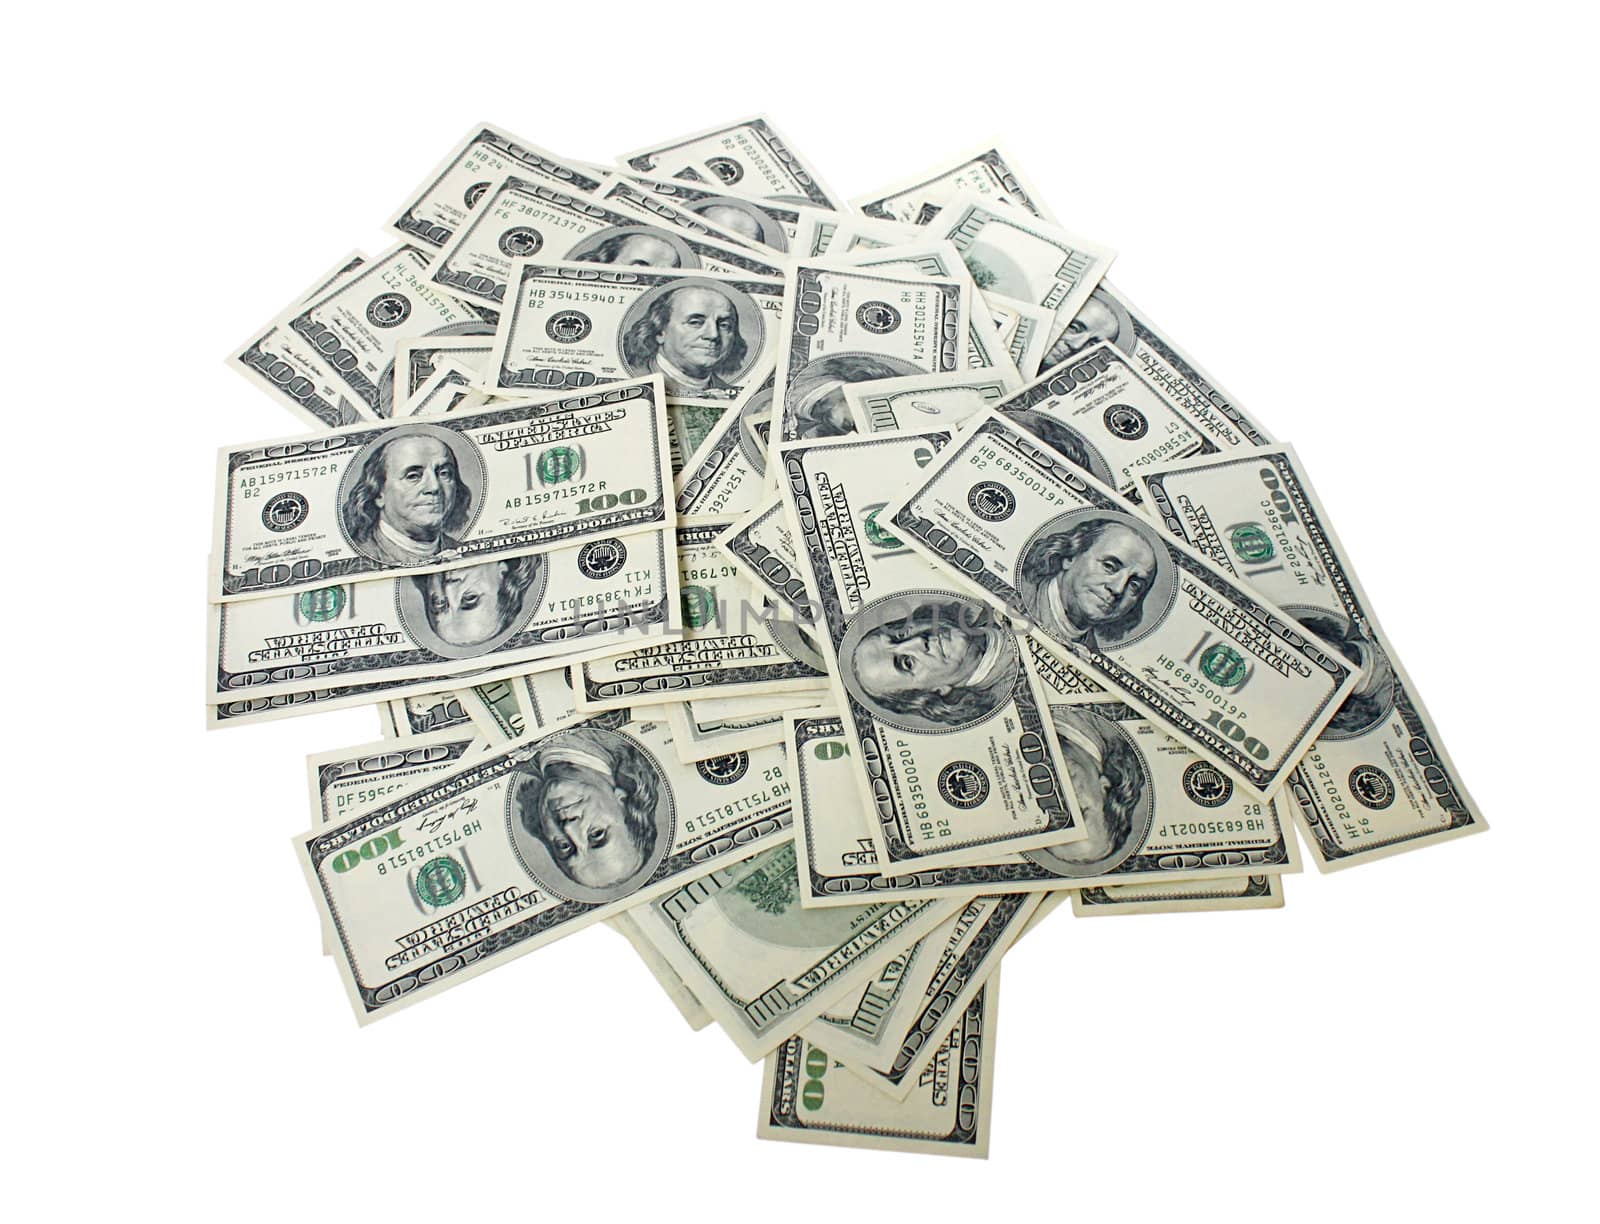 heap of banknotes (100 dollars) over white background